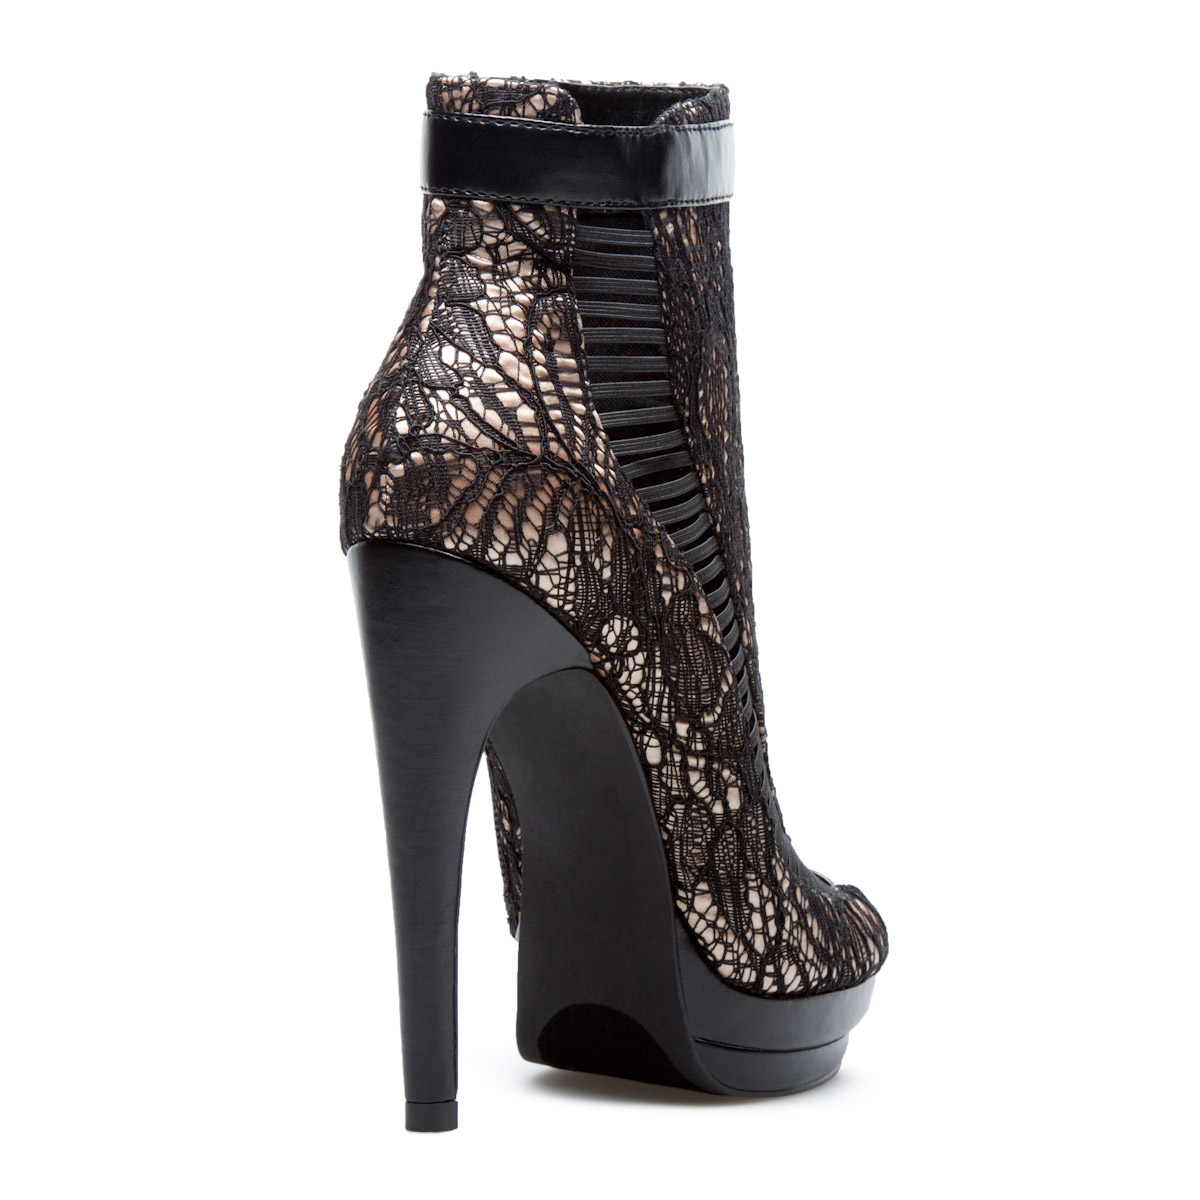 Jeanelly - ShoeDazzle